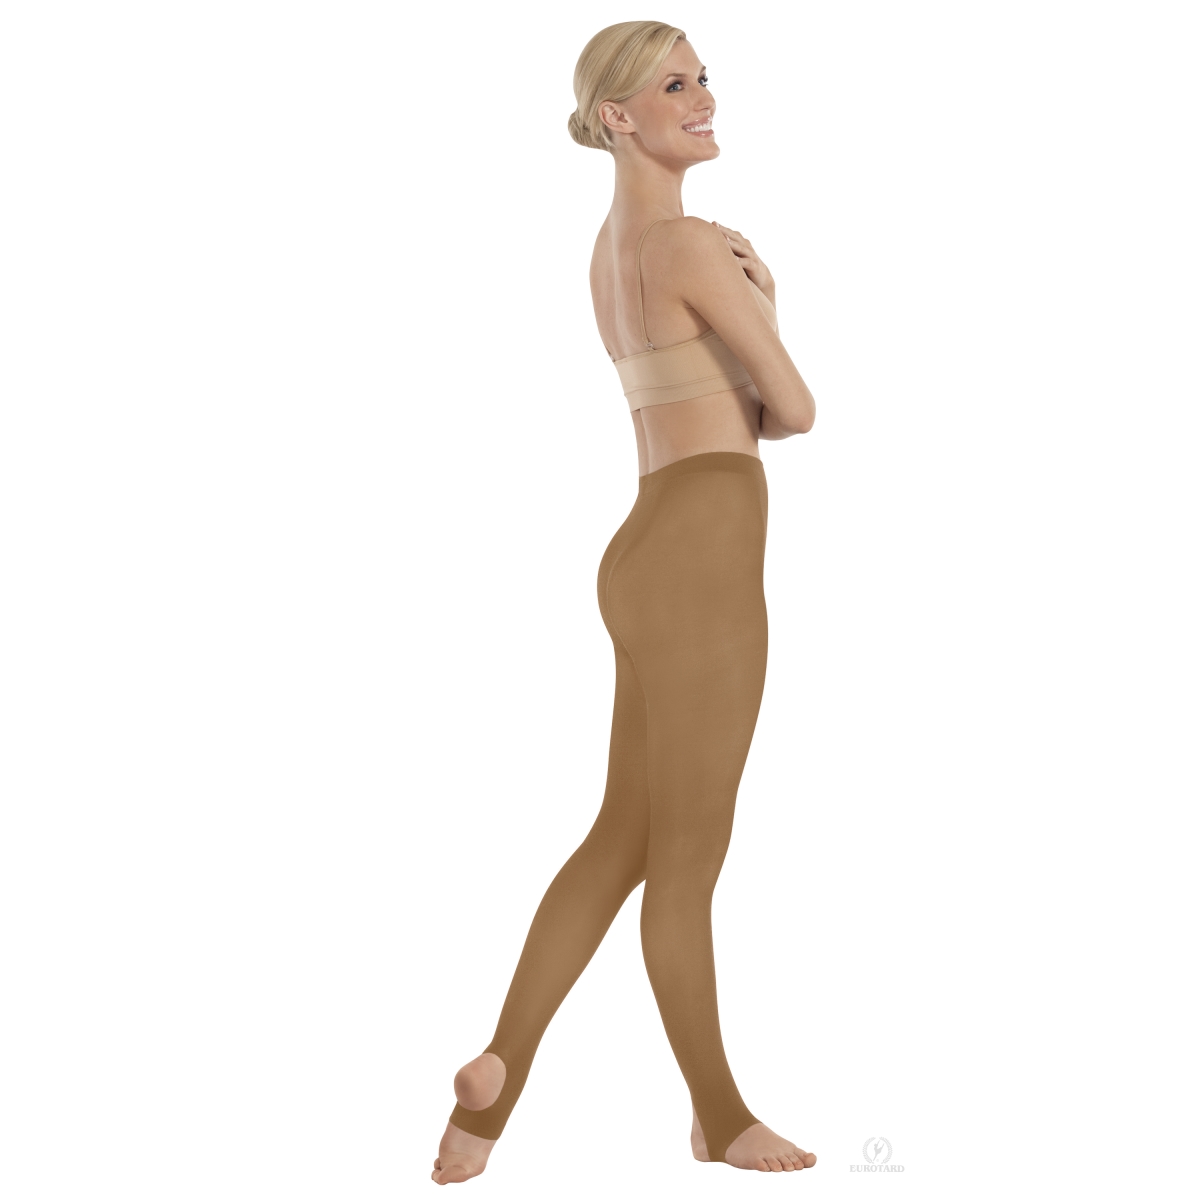 Picture of EuroSkins 217-C-S-M Intimates Adult Non-Run Stirrup Tights, Caramel - Small & Medium